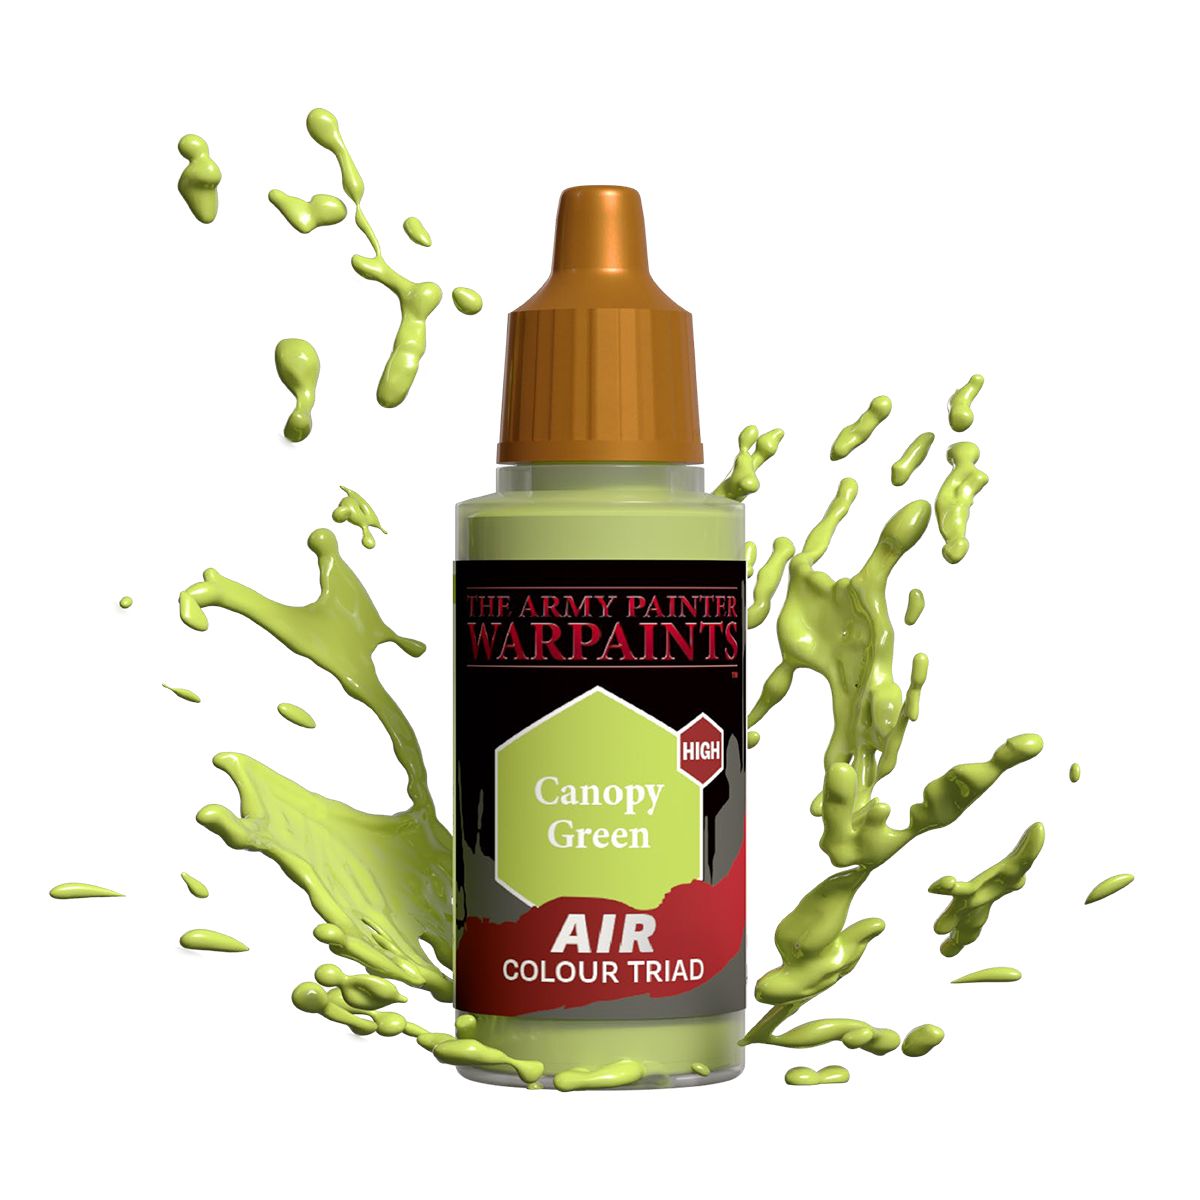 Army Painter Warpaints - Air Canopy Green Acrylic Paint 18ml